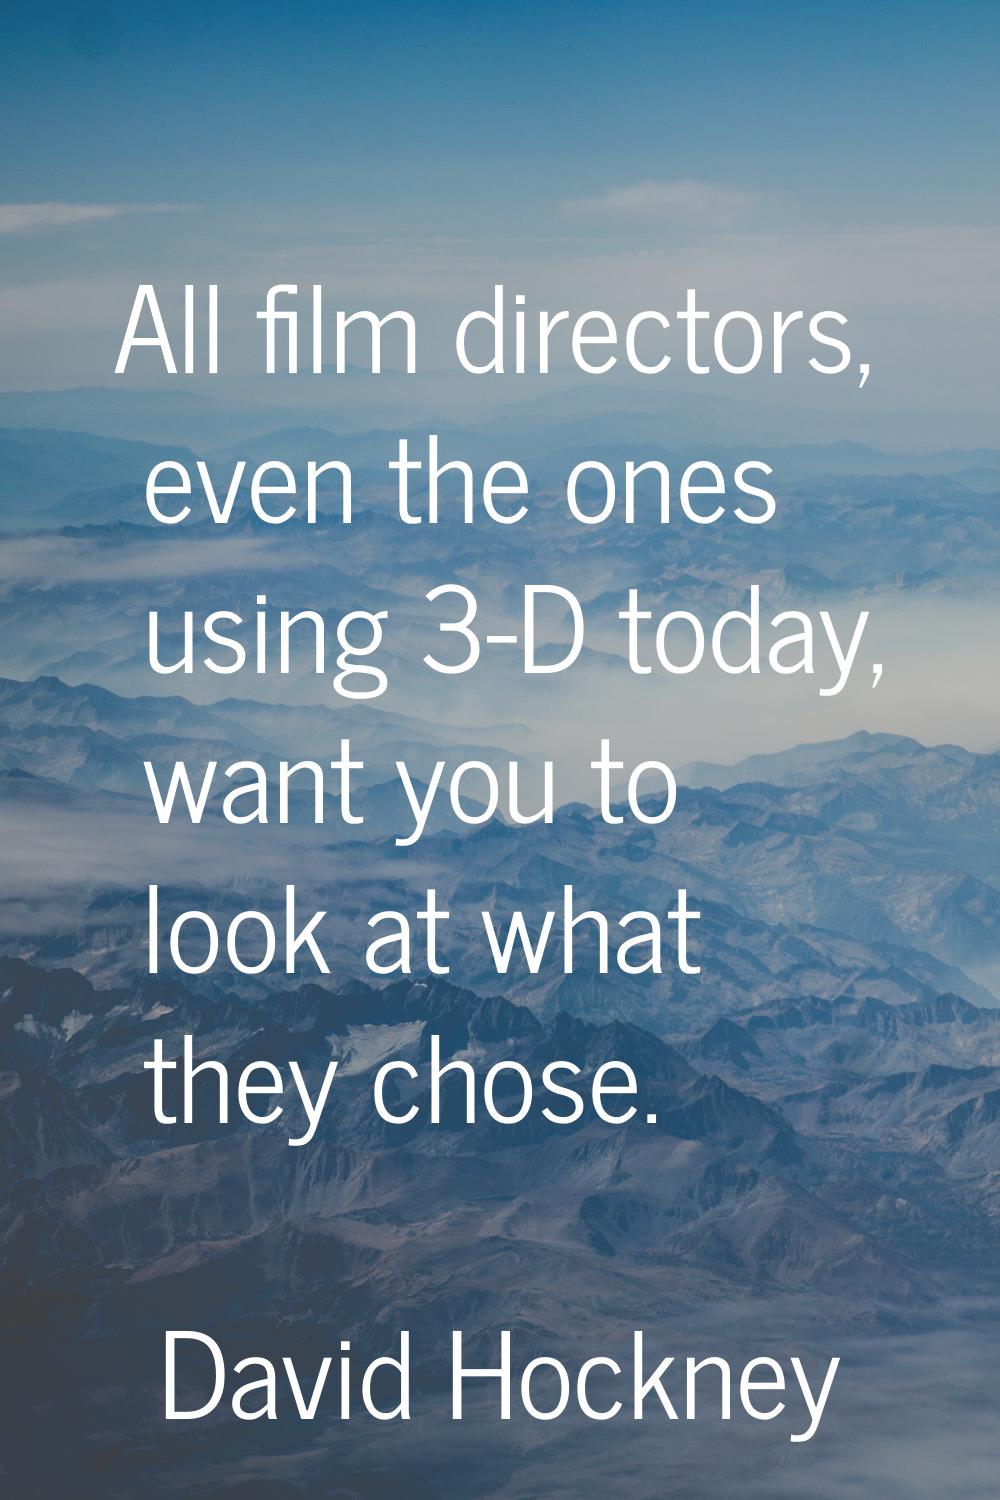 All film directors, even the ones using 3-D today, want you to look at what they chose.